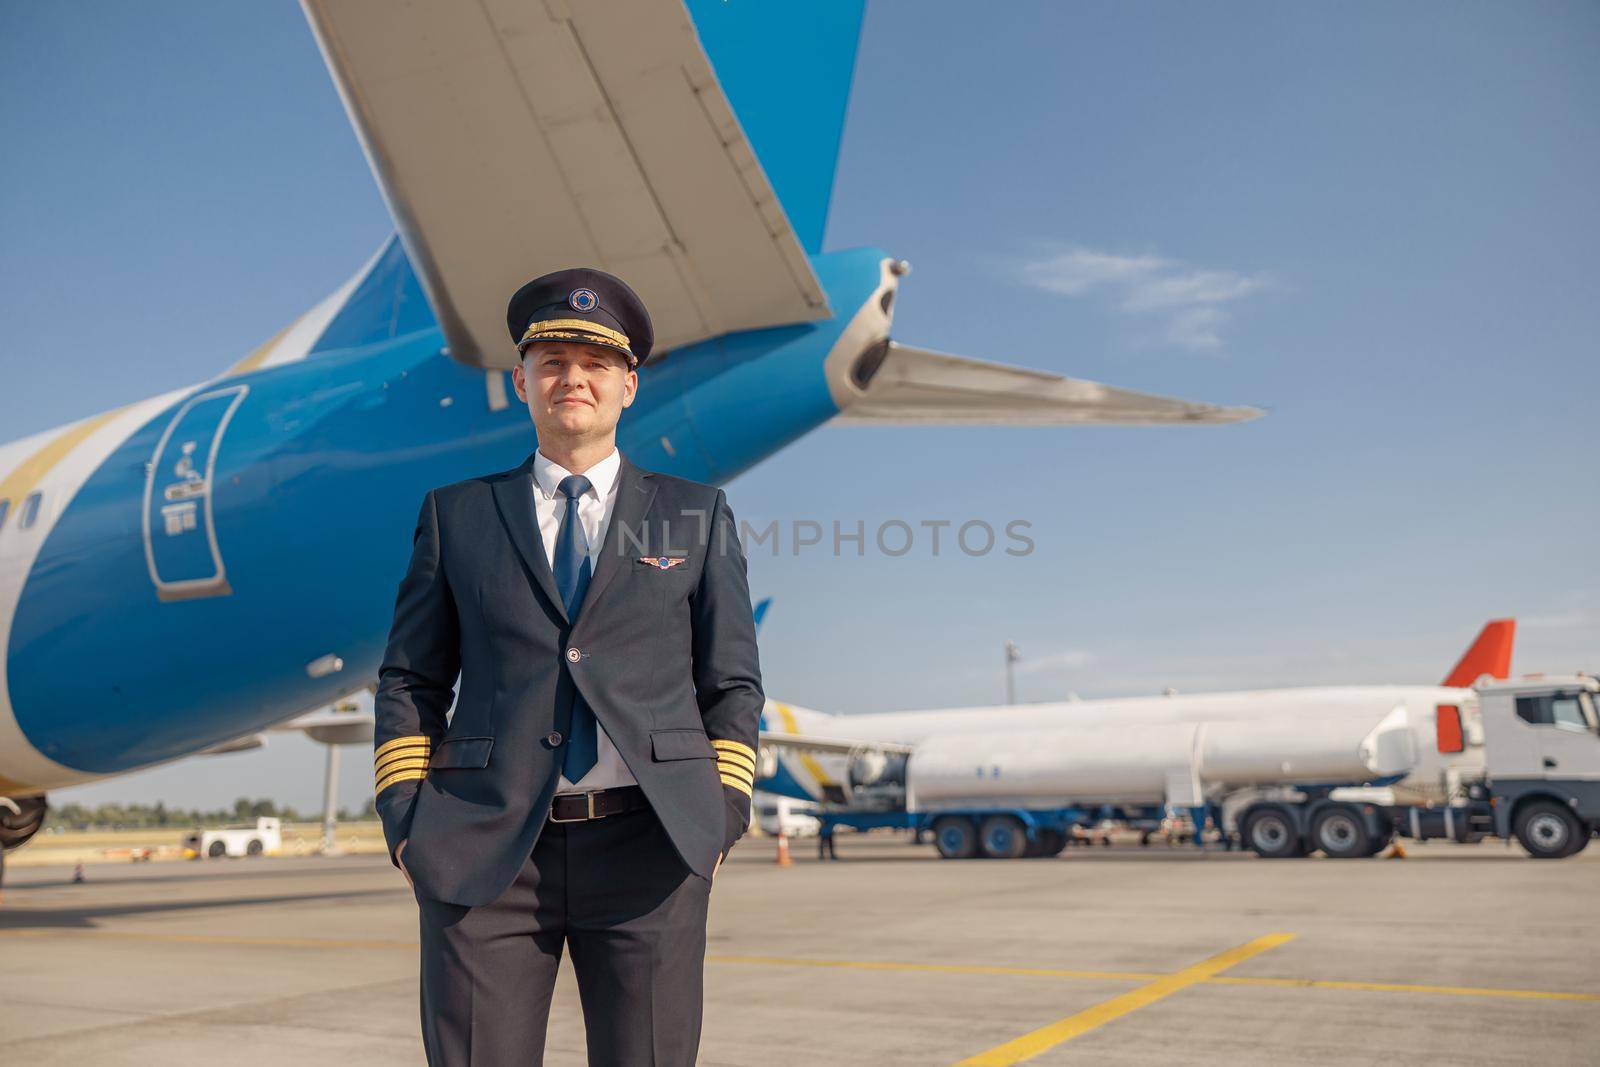 Professional pilot in uniform looking at camera, standing in front of big passenger airplane ready for departure in airport by Yaroslav_astakhov